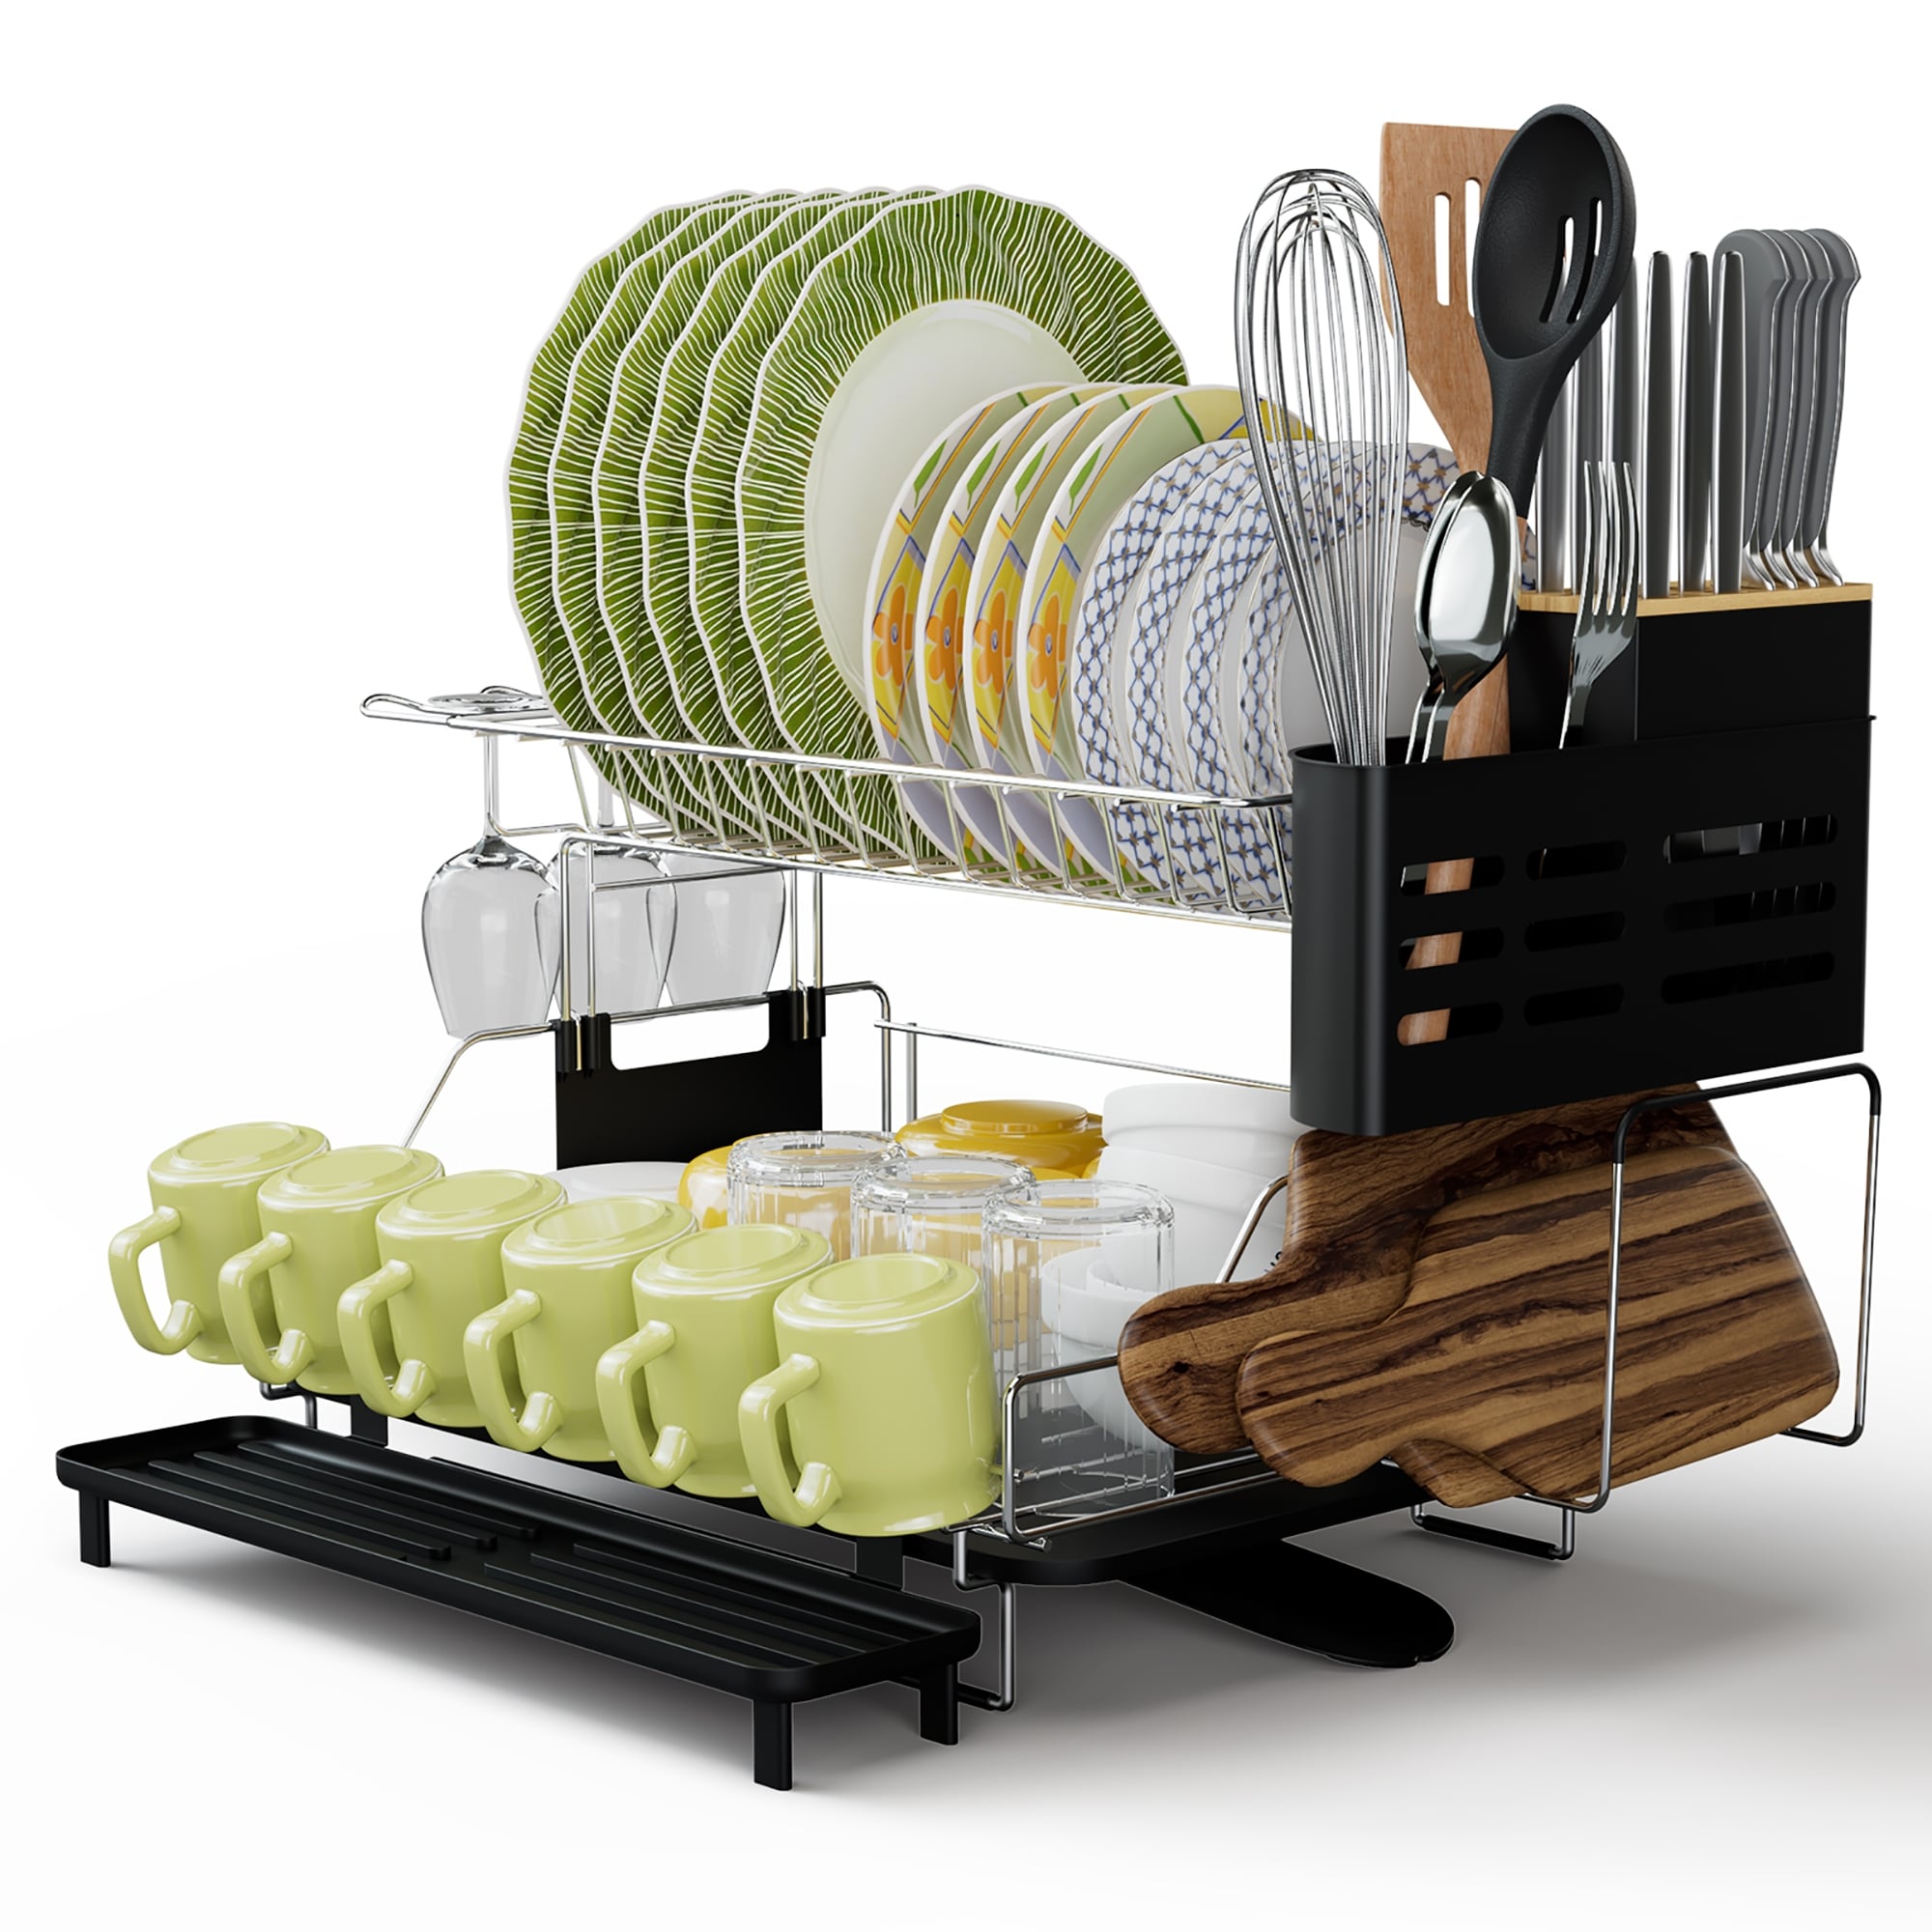 2 Tier Dish Drainers Strainer with Drainboard Anti-slip Space